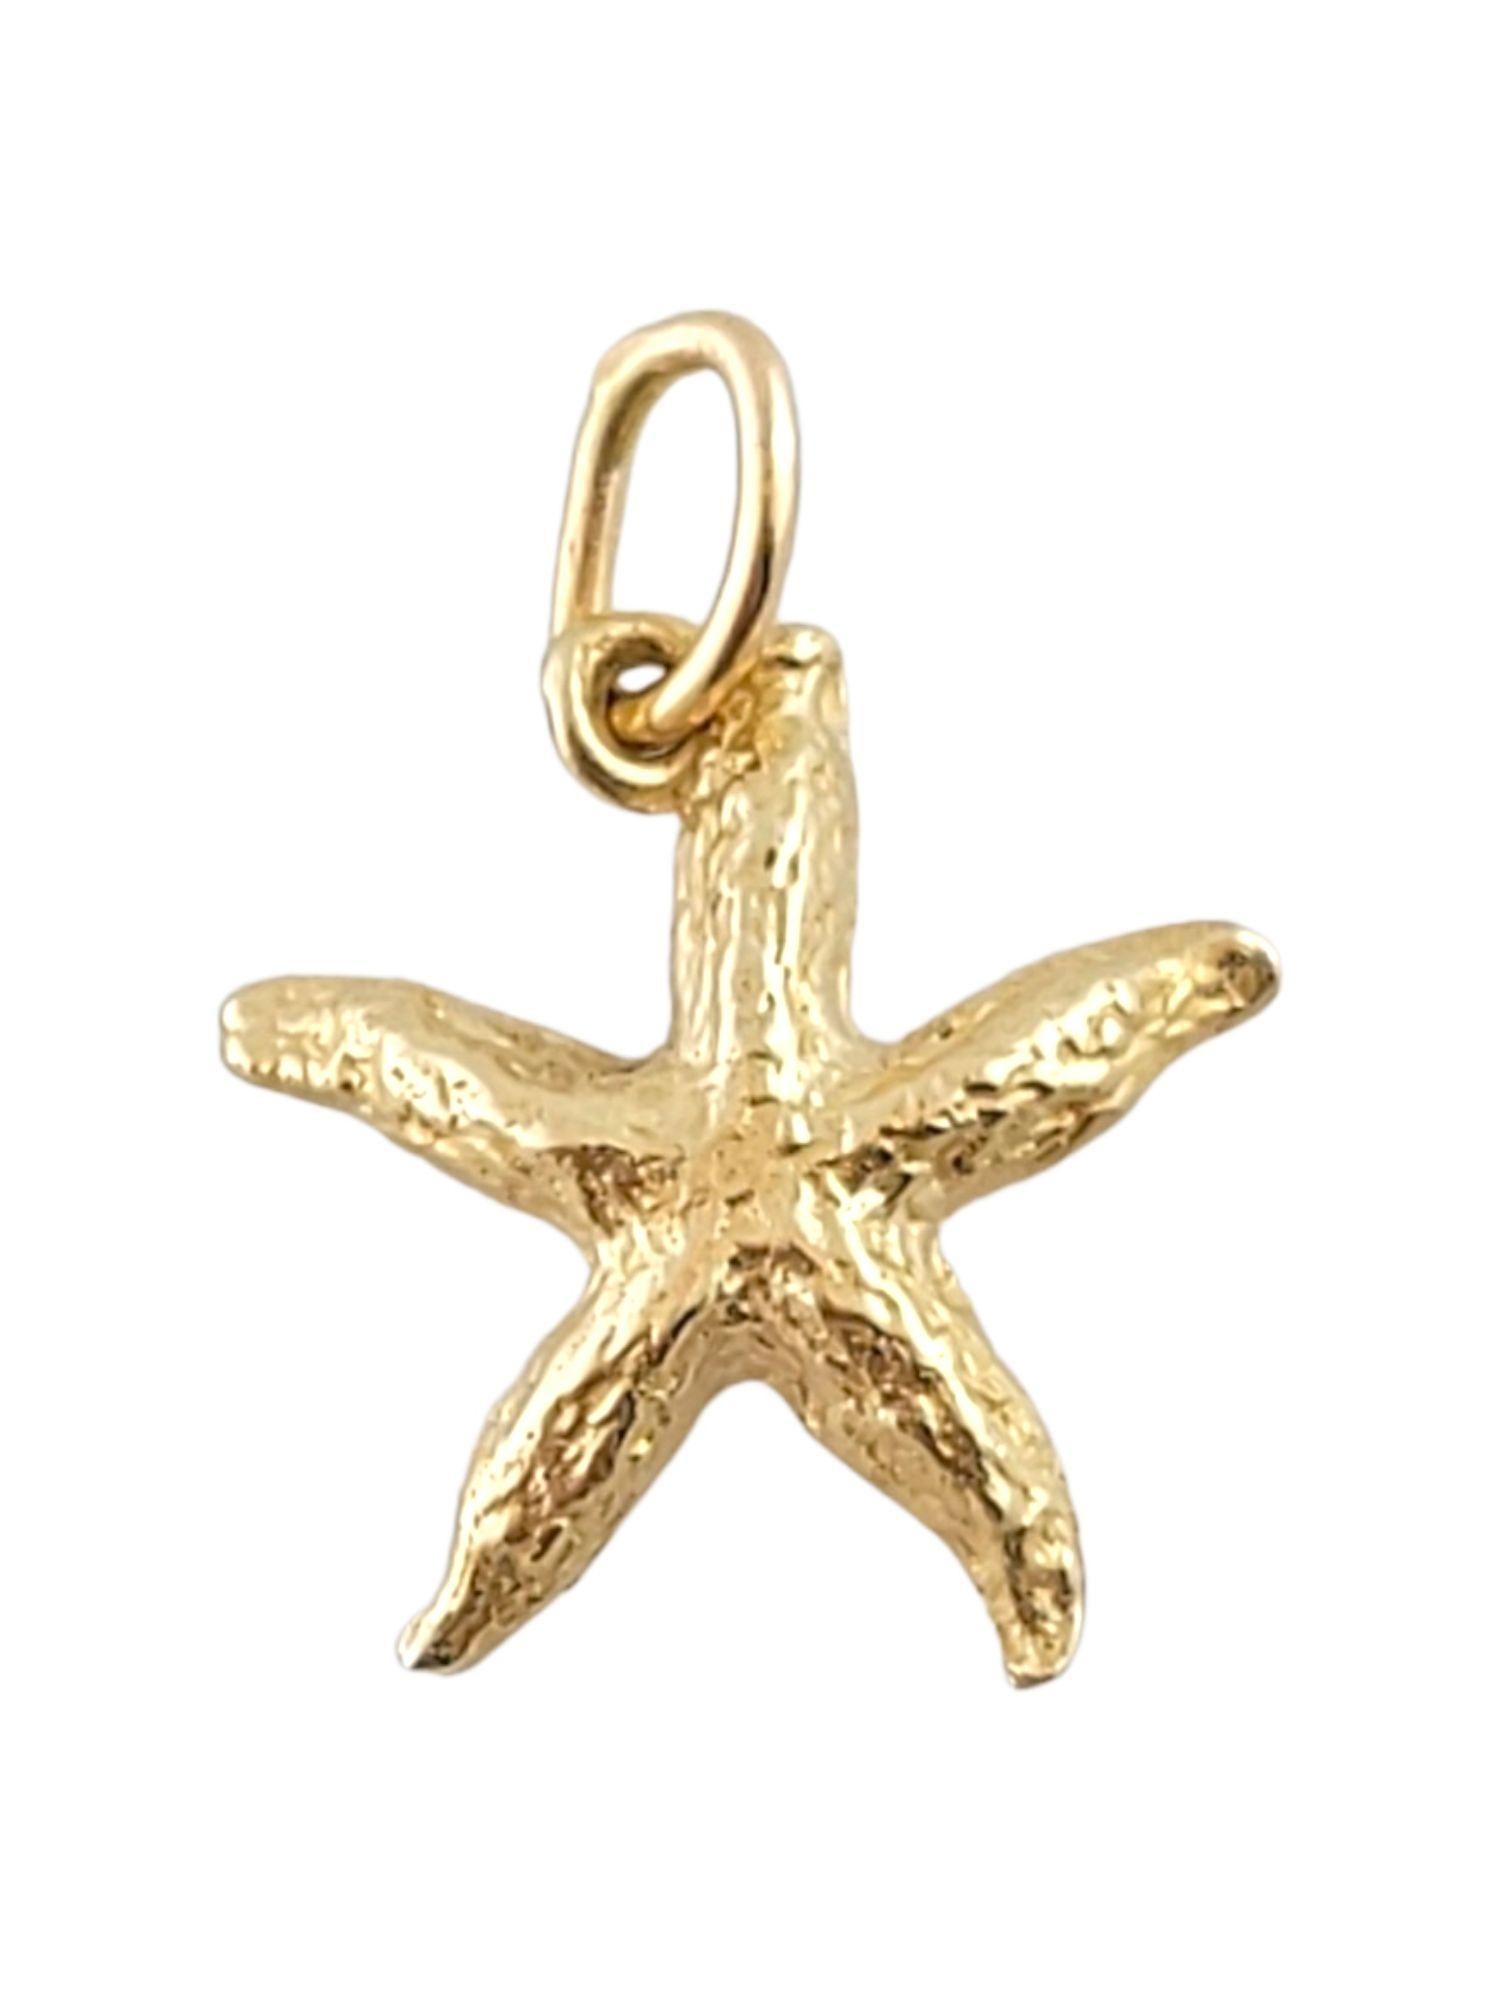 Vintage 14K Yellow Gold Starfish Charm

Adorable starfish charm crafted from 14K yellow gold!

Size: 15.1mm X 14.6mm X 3.0mm

Length w/ bail: 19.9mm

Weight: 1.40 g/ 0.9 dwt

Hallmark: Rac 14K

*Chain not included*

Very good condition,